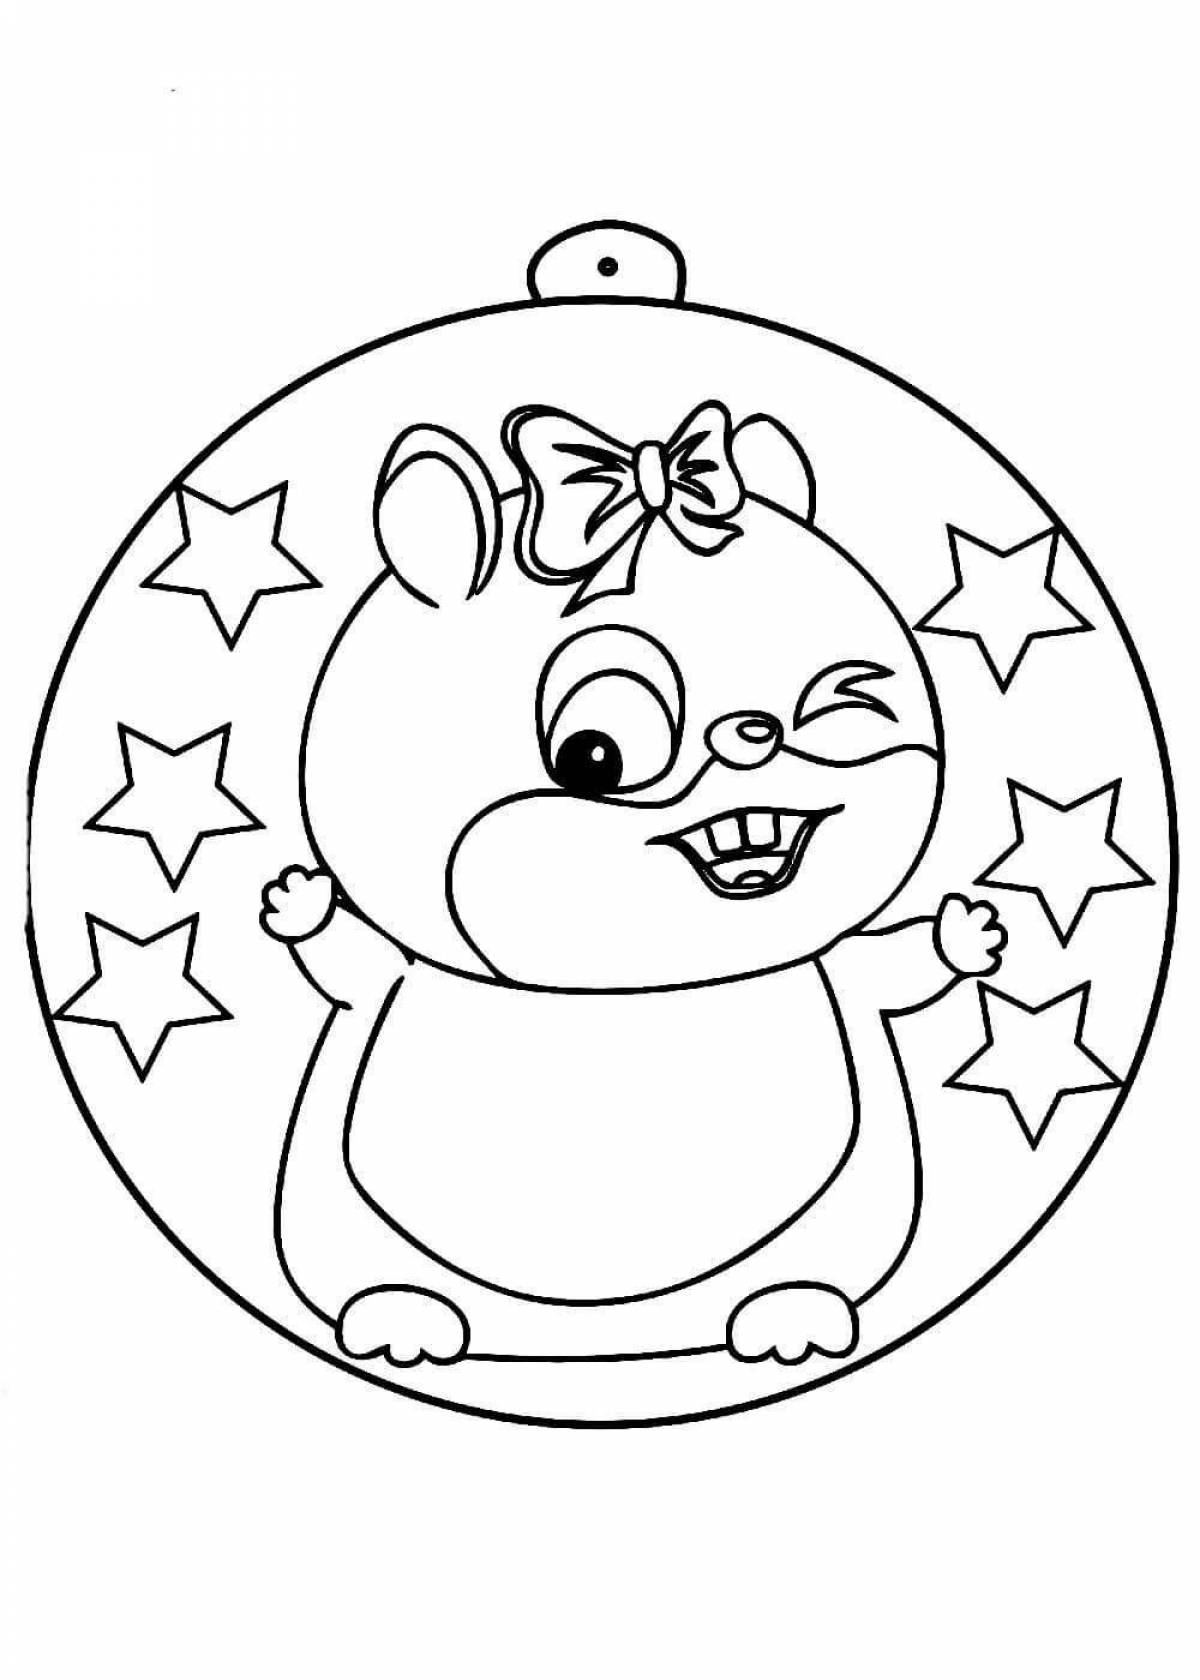 Coloring book shining Christmas toy